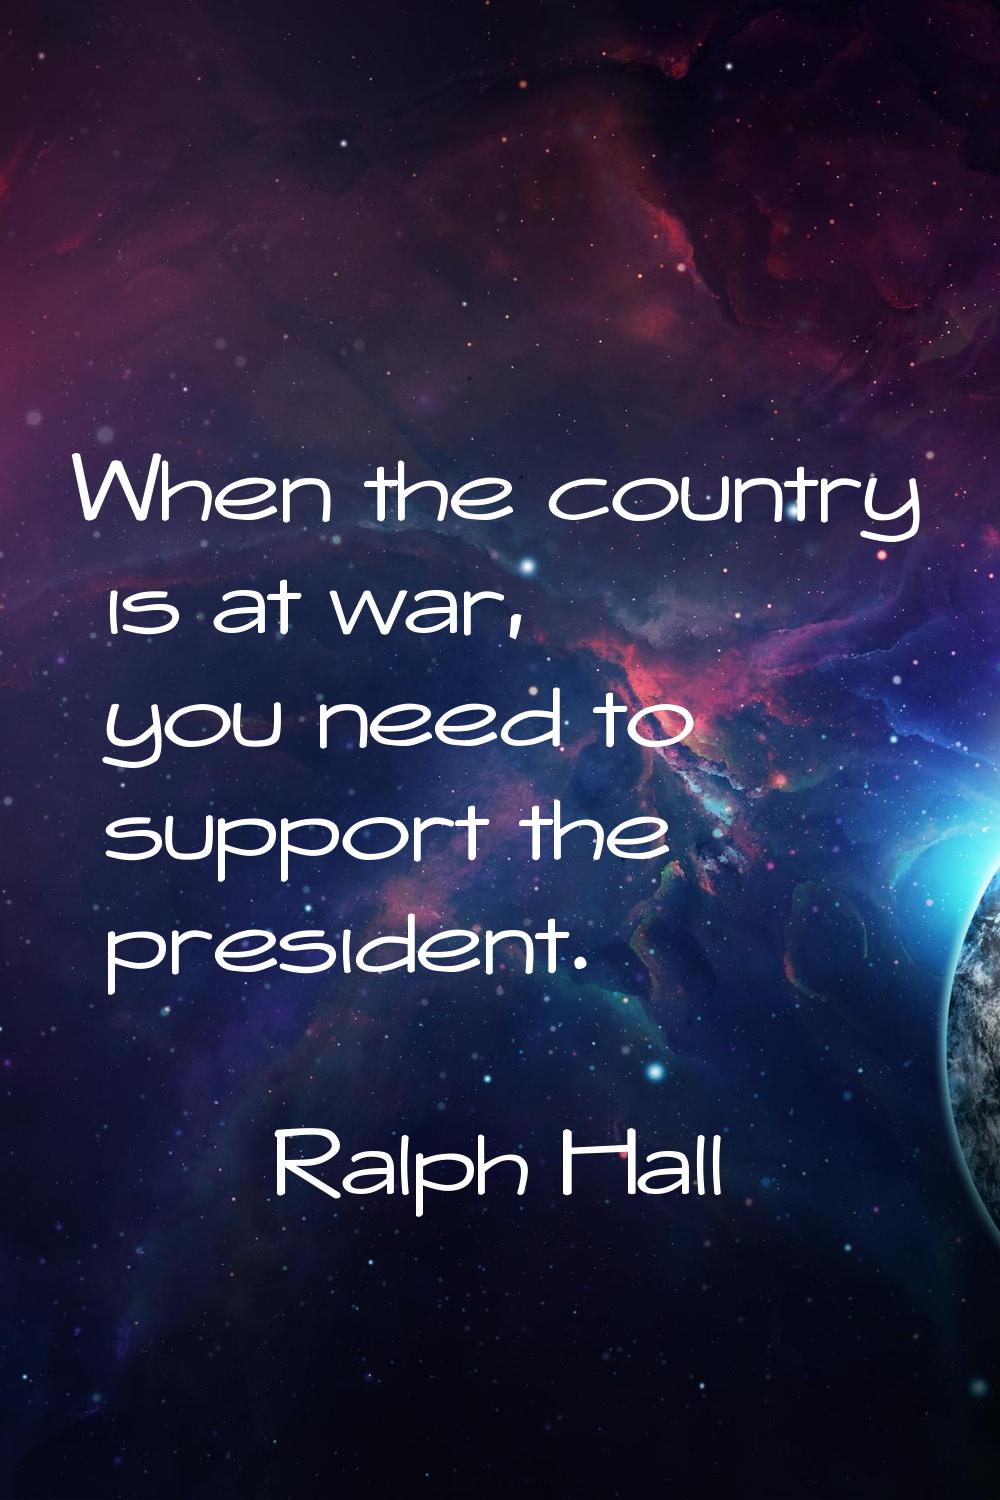 When the country is at war, you need to support the president.